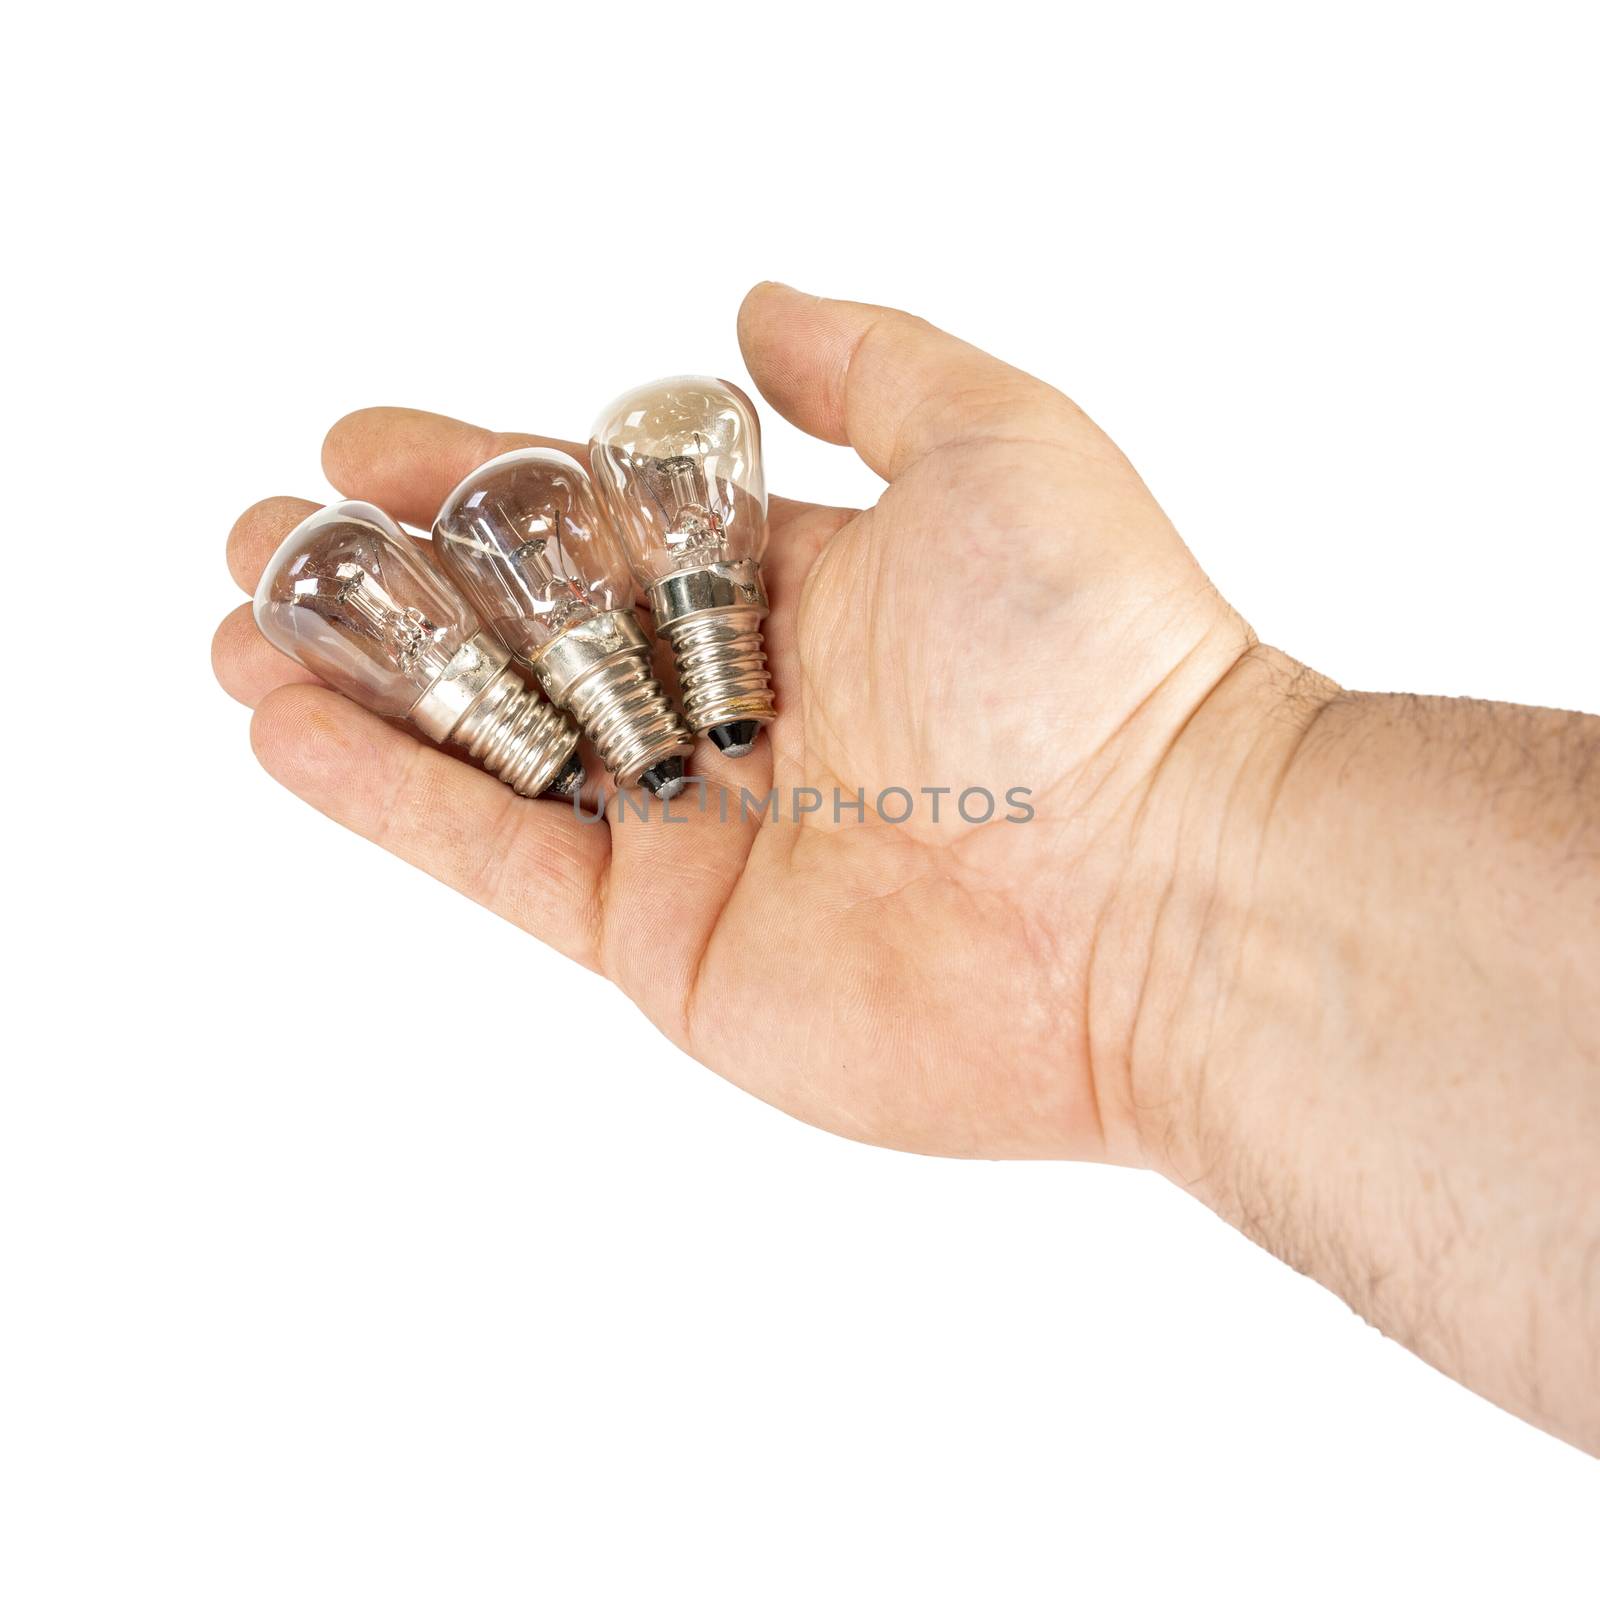 Some old tungsten incandescent lamp in hand. Isolated image on a white background.